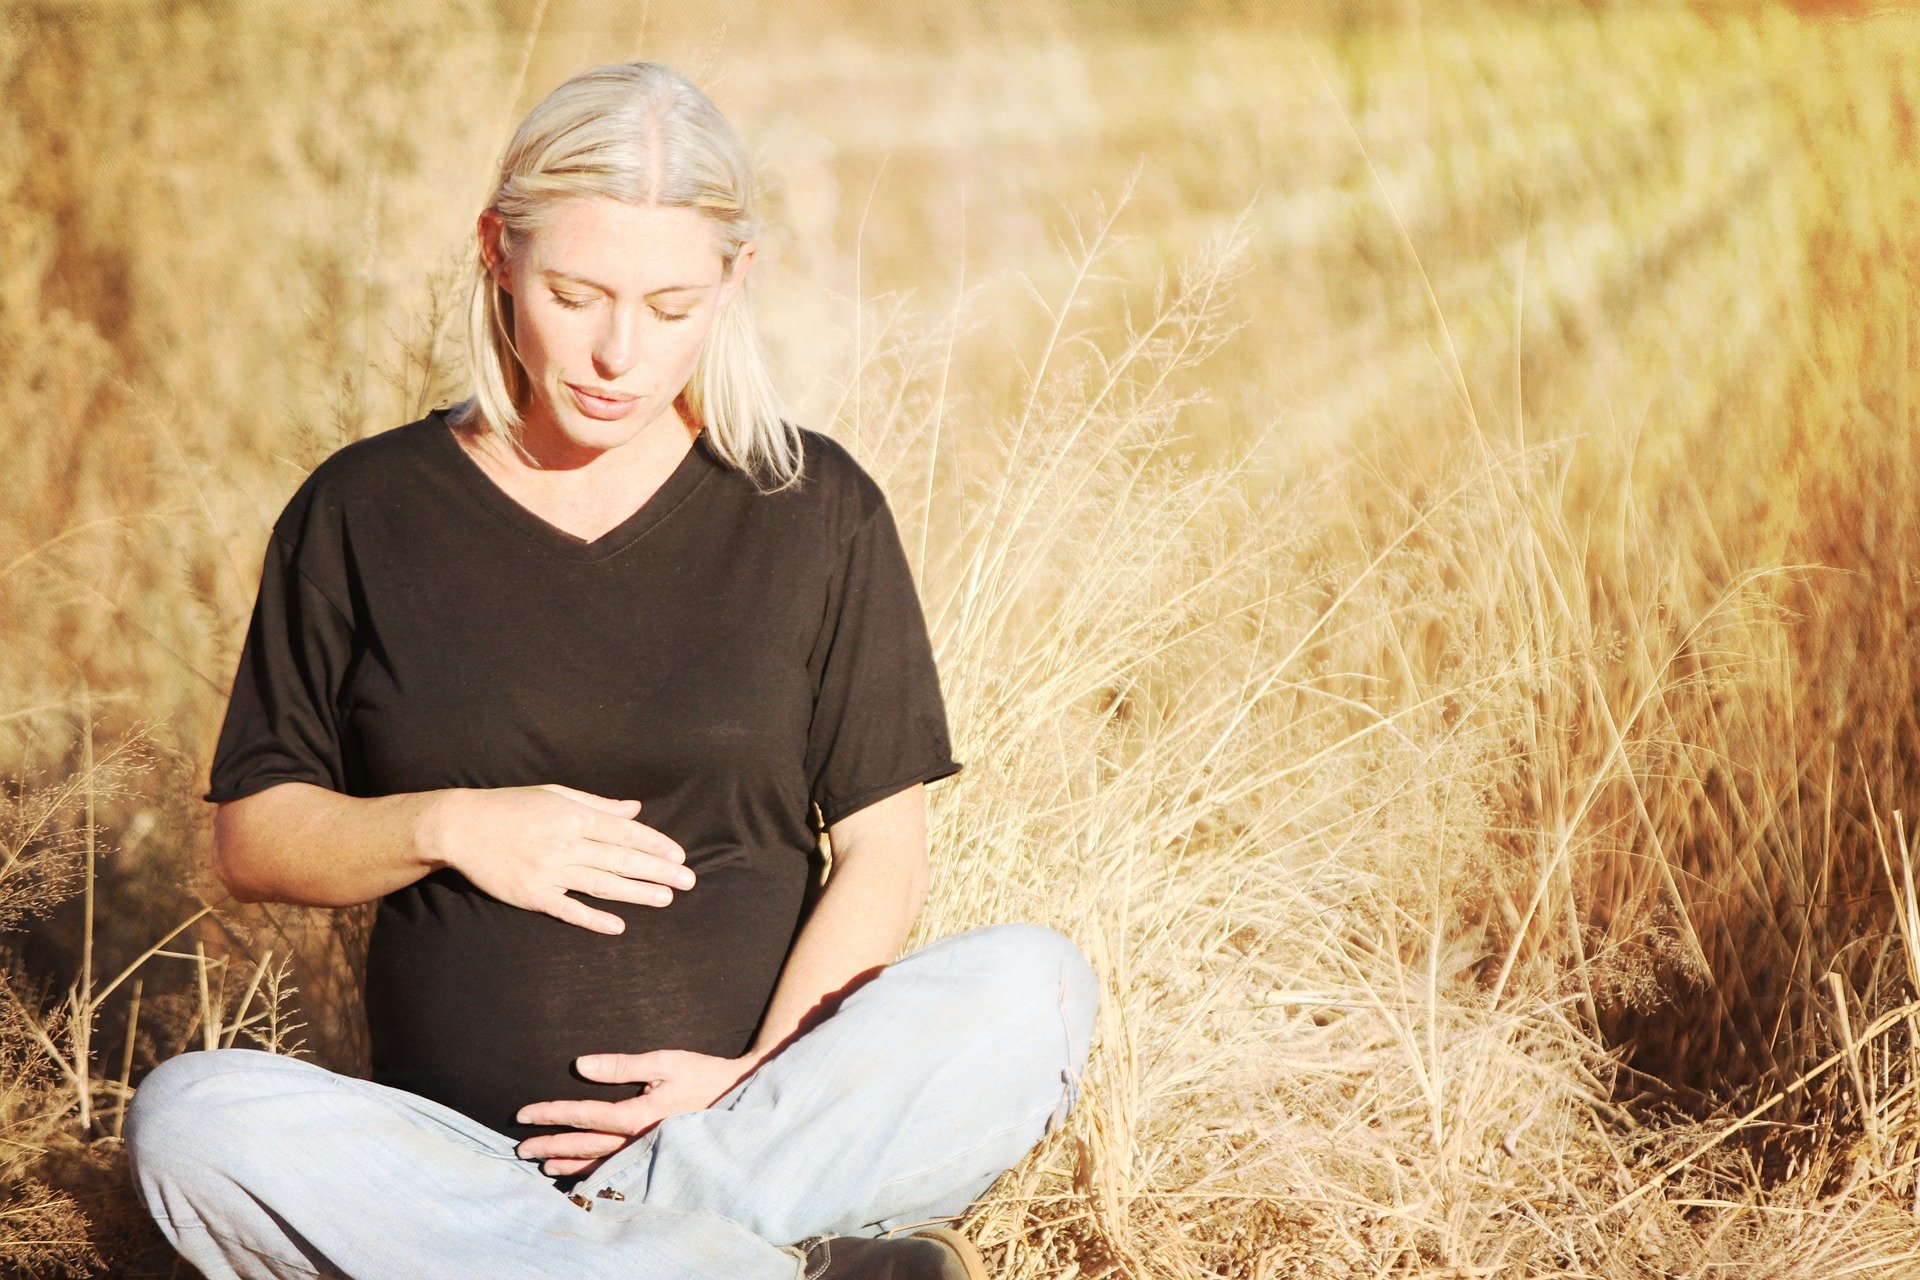 Pregnant woman with hands on her belly sitting in field.